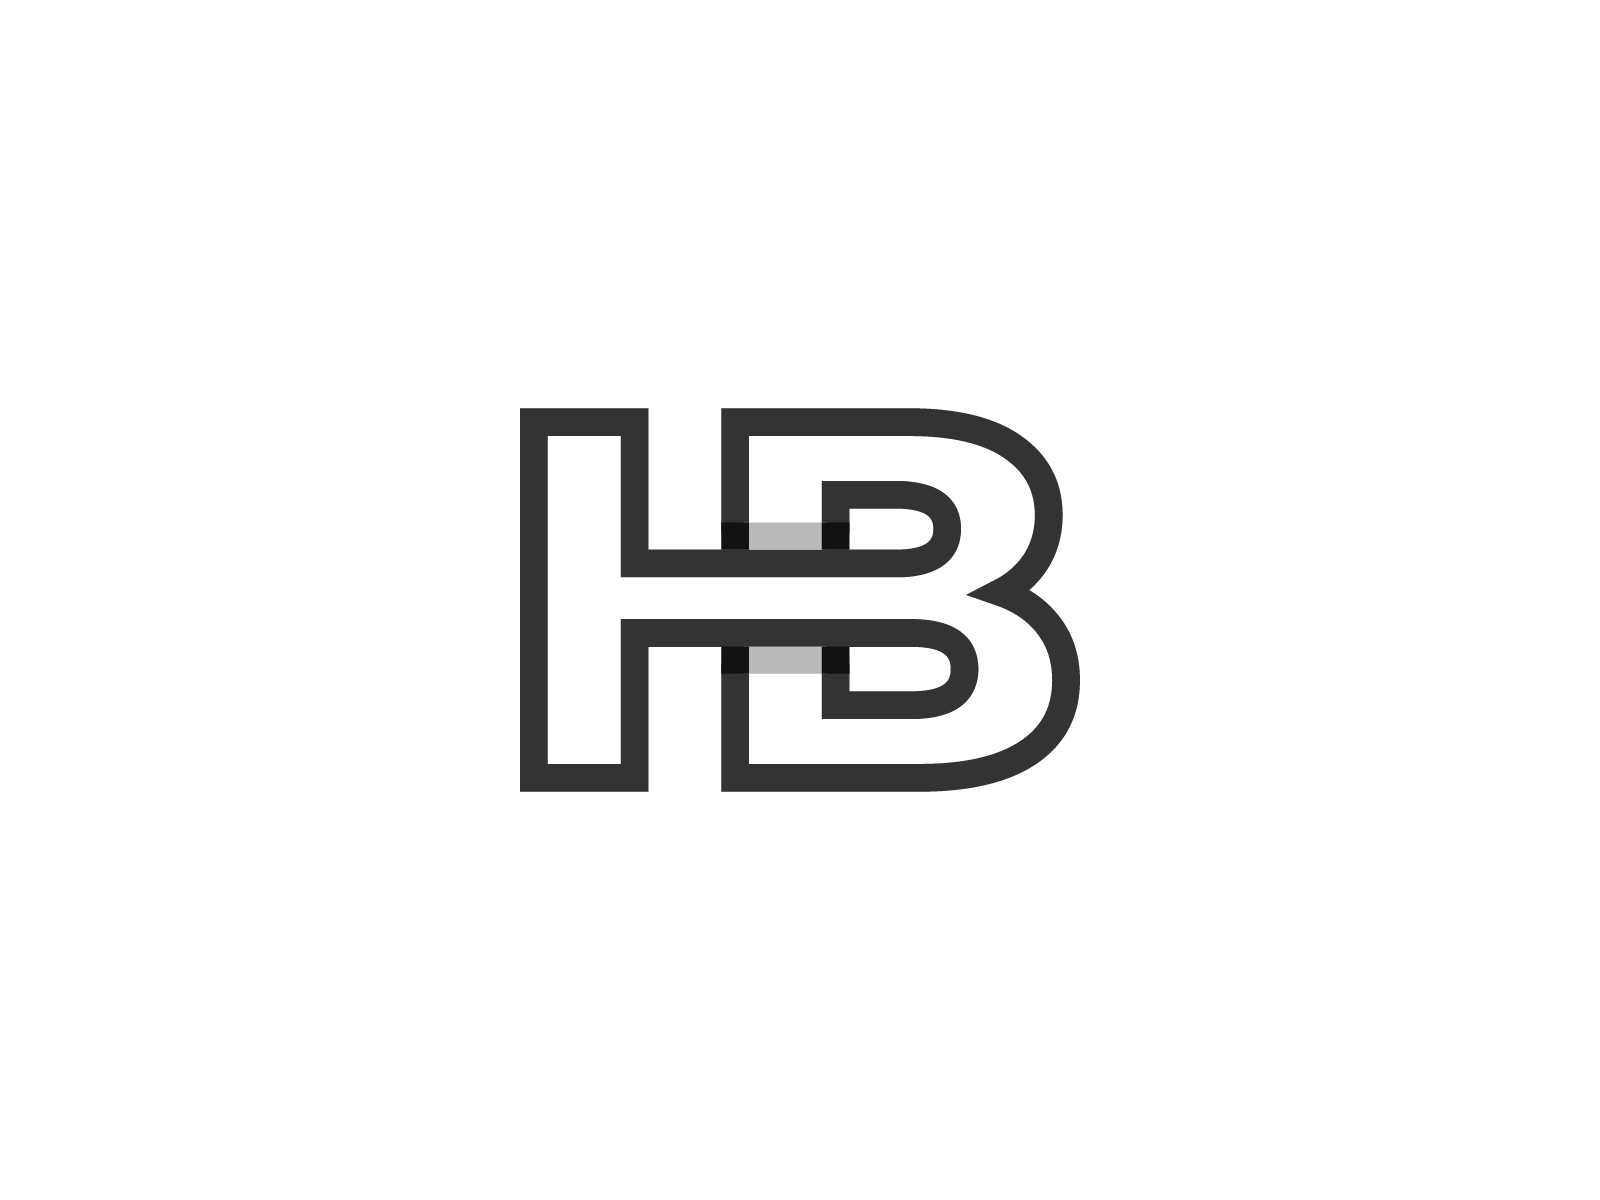 Initial Letter Hb Bh Logo Design With White Background Vector Illustration  Template, Rat Drawing, Plate Drawing, Sign Drawing PNG and Vector with  Transparent Background for Free Download